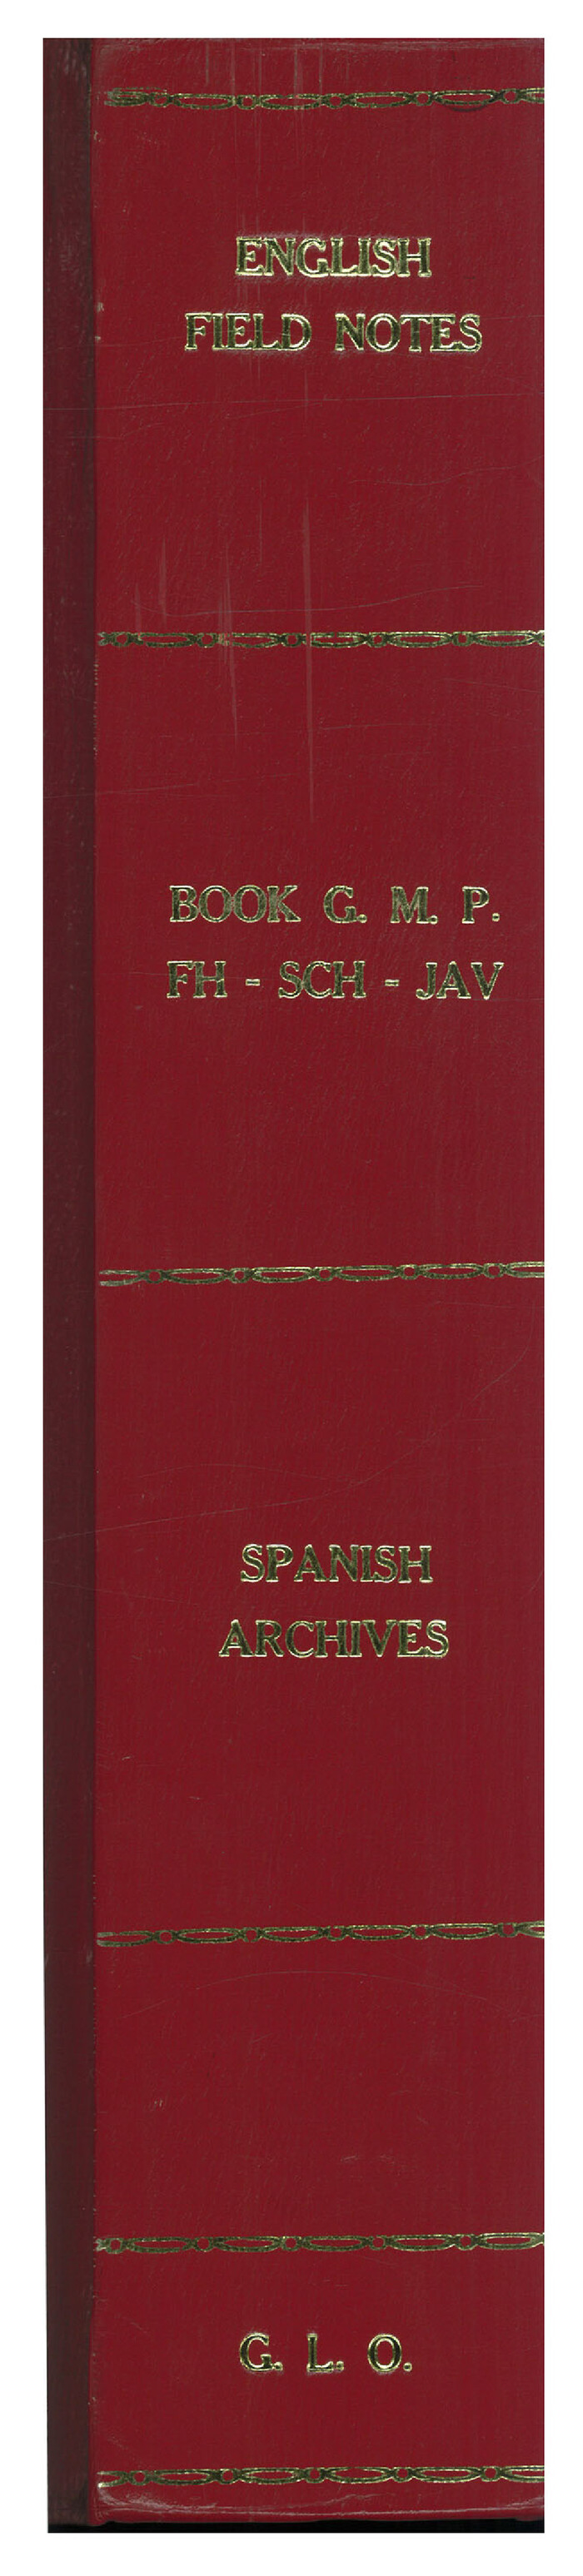 96545, English Field Notes of the Spanish Archives - Books GMP, FH, SCH, and JAV, Historical Volumes